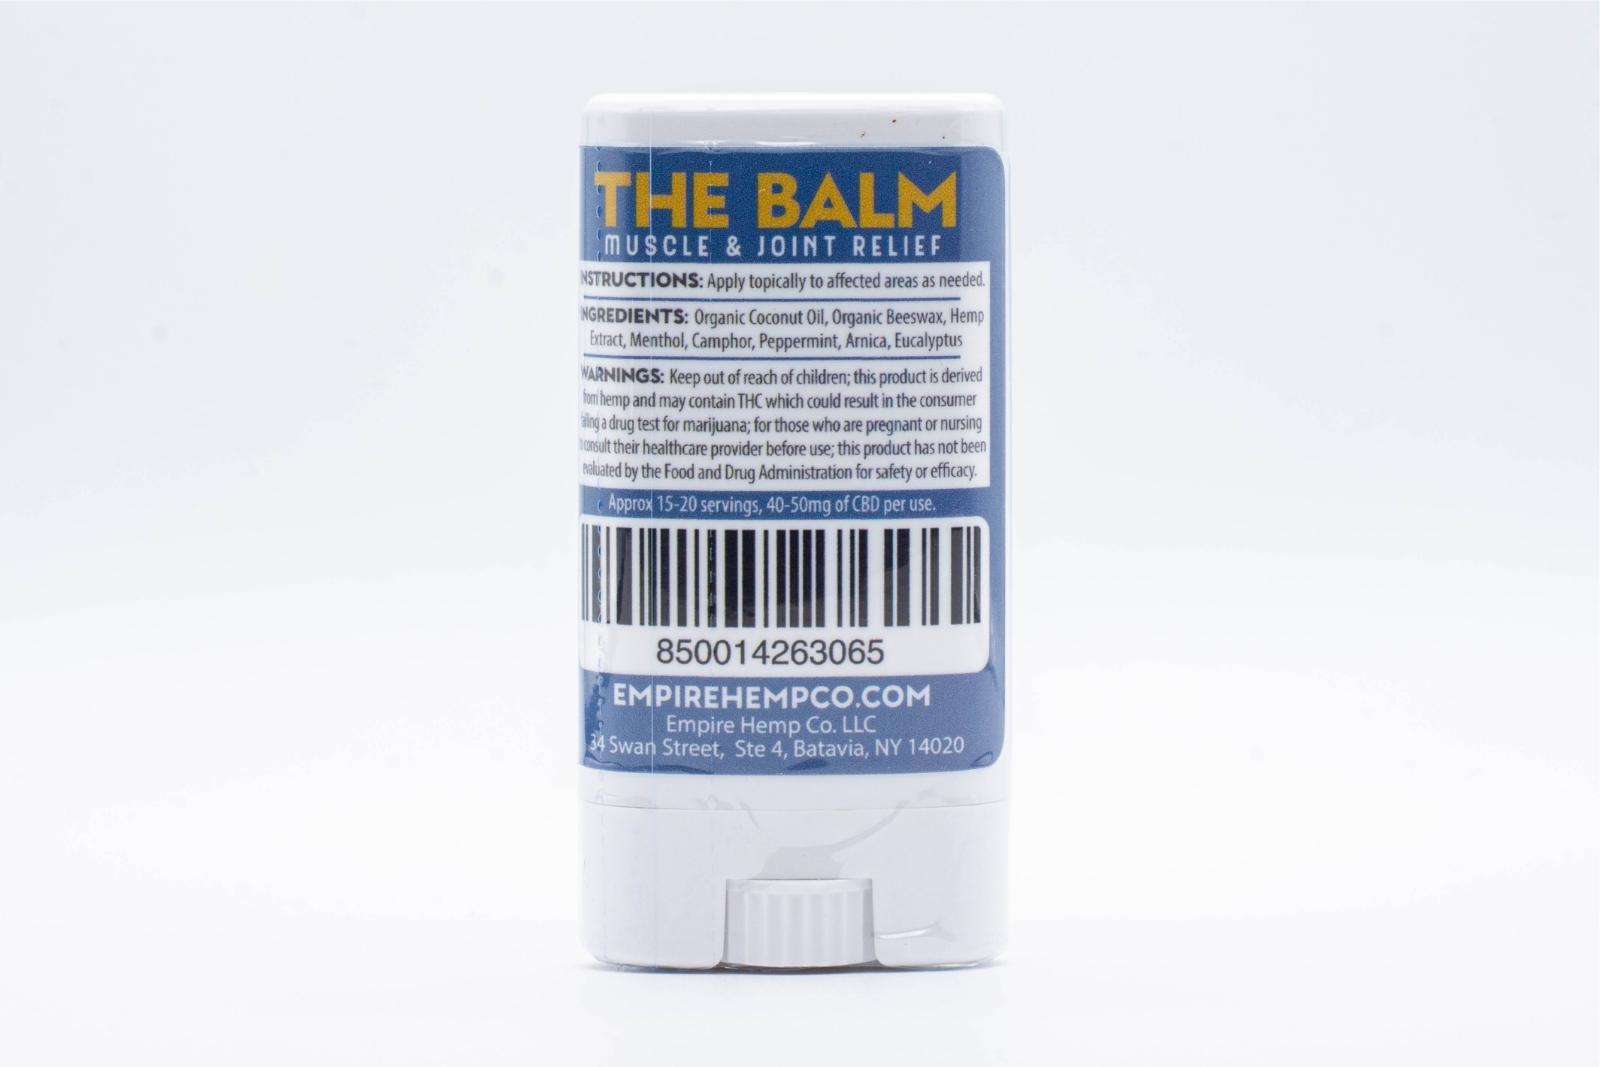 The back of a container of CBD Topical called The Balm from Empire Hemp Co.